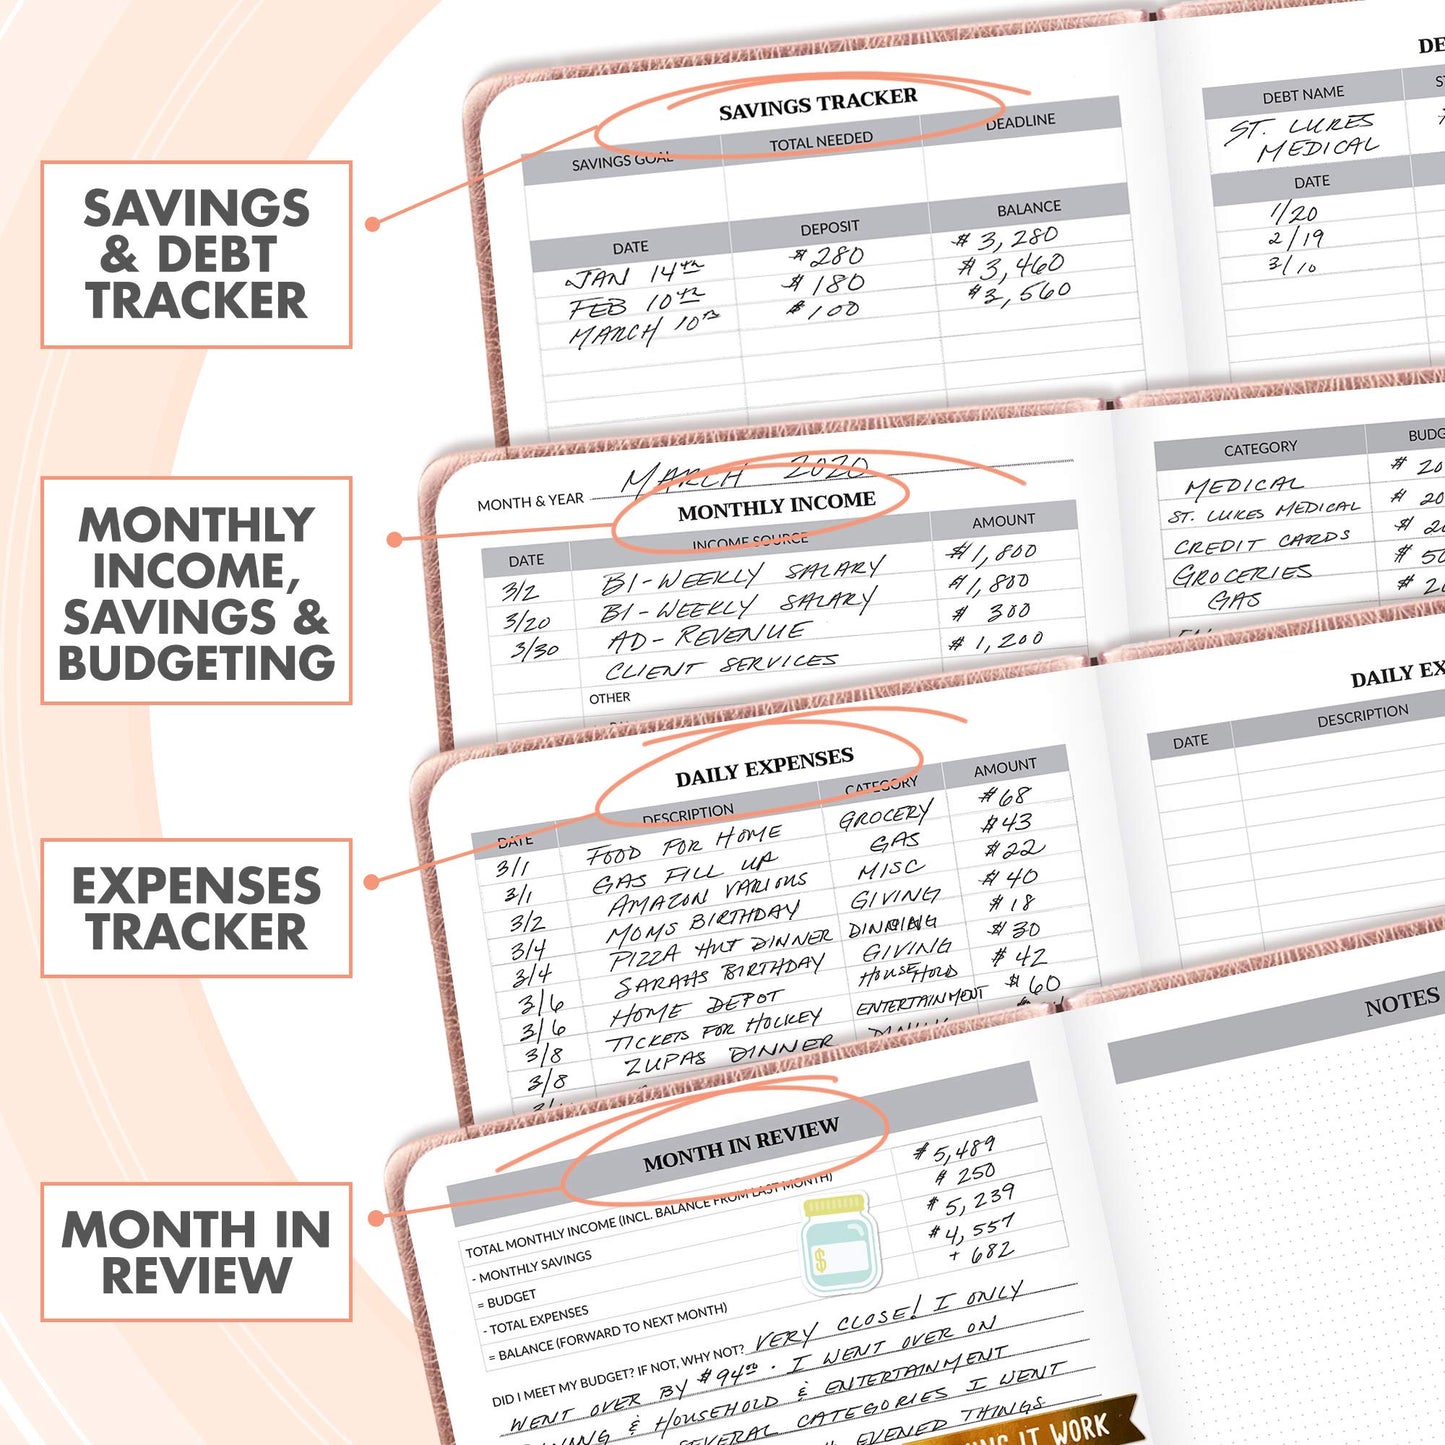 Simplified Monthly Budget Planner - Easy Use 12 Month Financial Organizer with Expense Tracker Notebook - The 2021-2022 Monthly Money Budgeting Book That Manages Your Finances Effectively